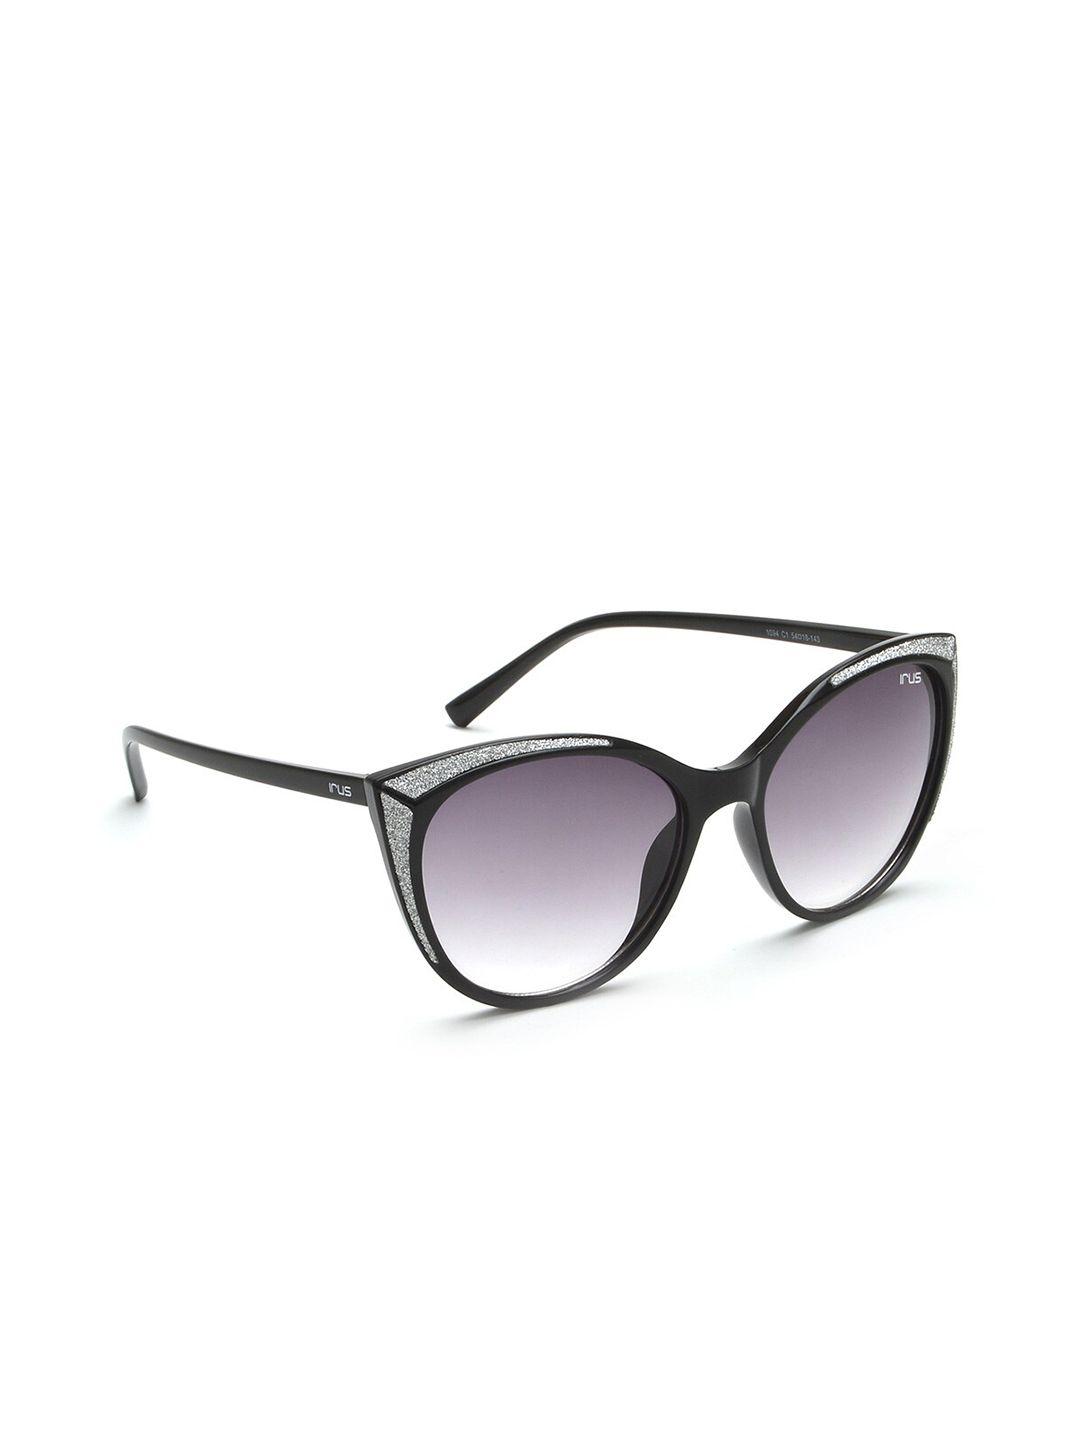 irus-by-idee-women-grey-lens-&-black-cateye-sunglasses-with-uv-protected-lens